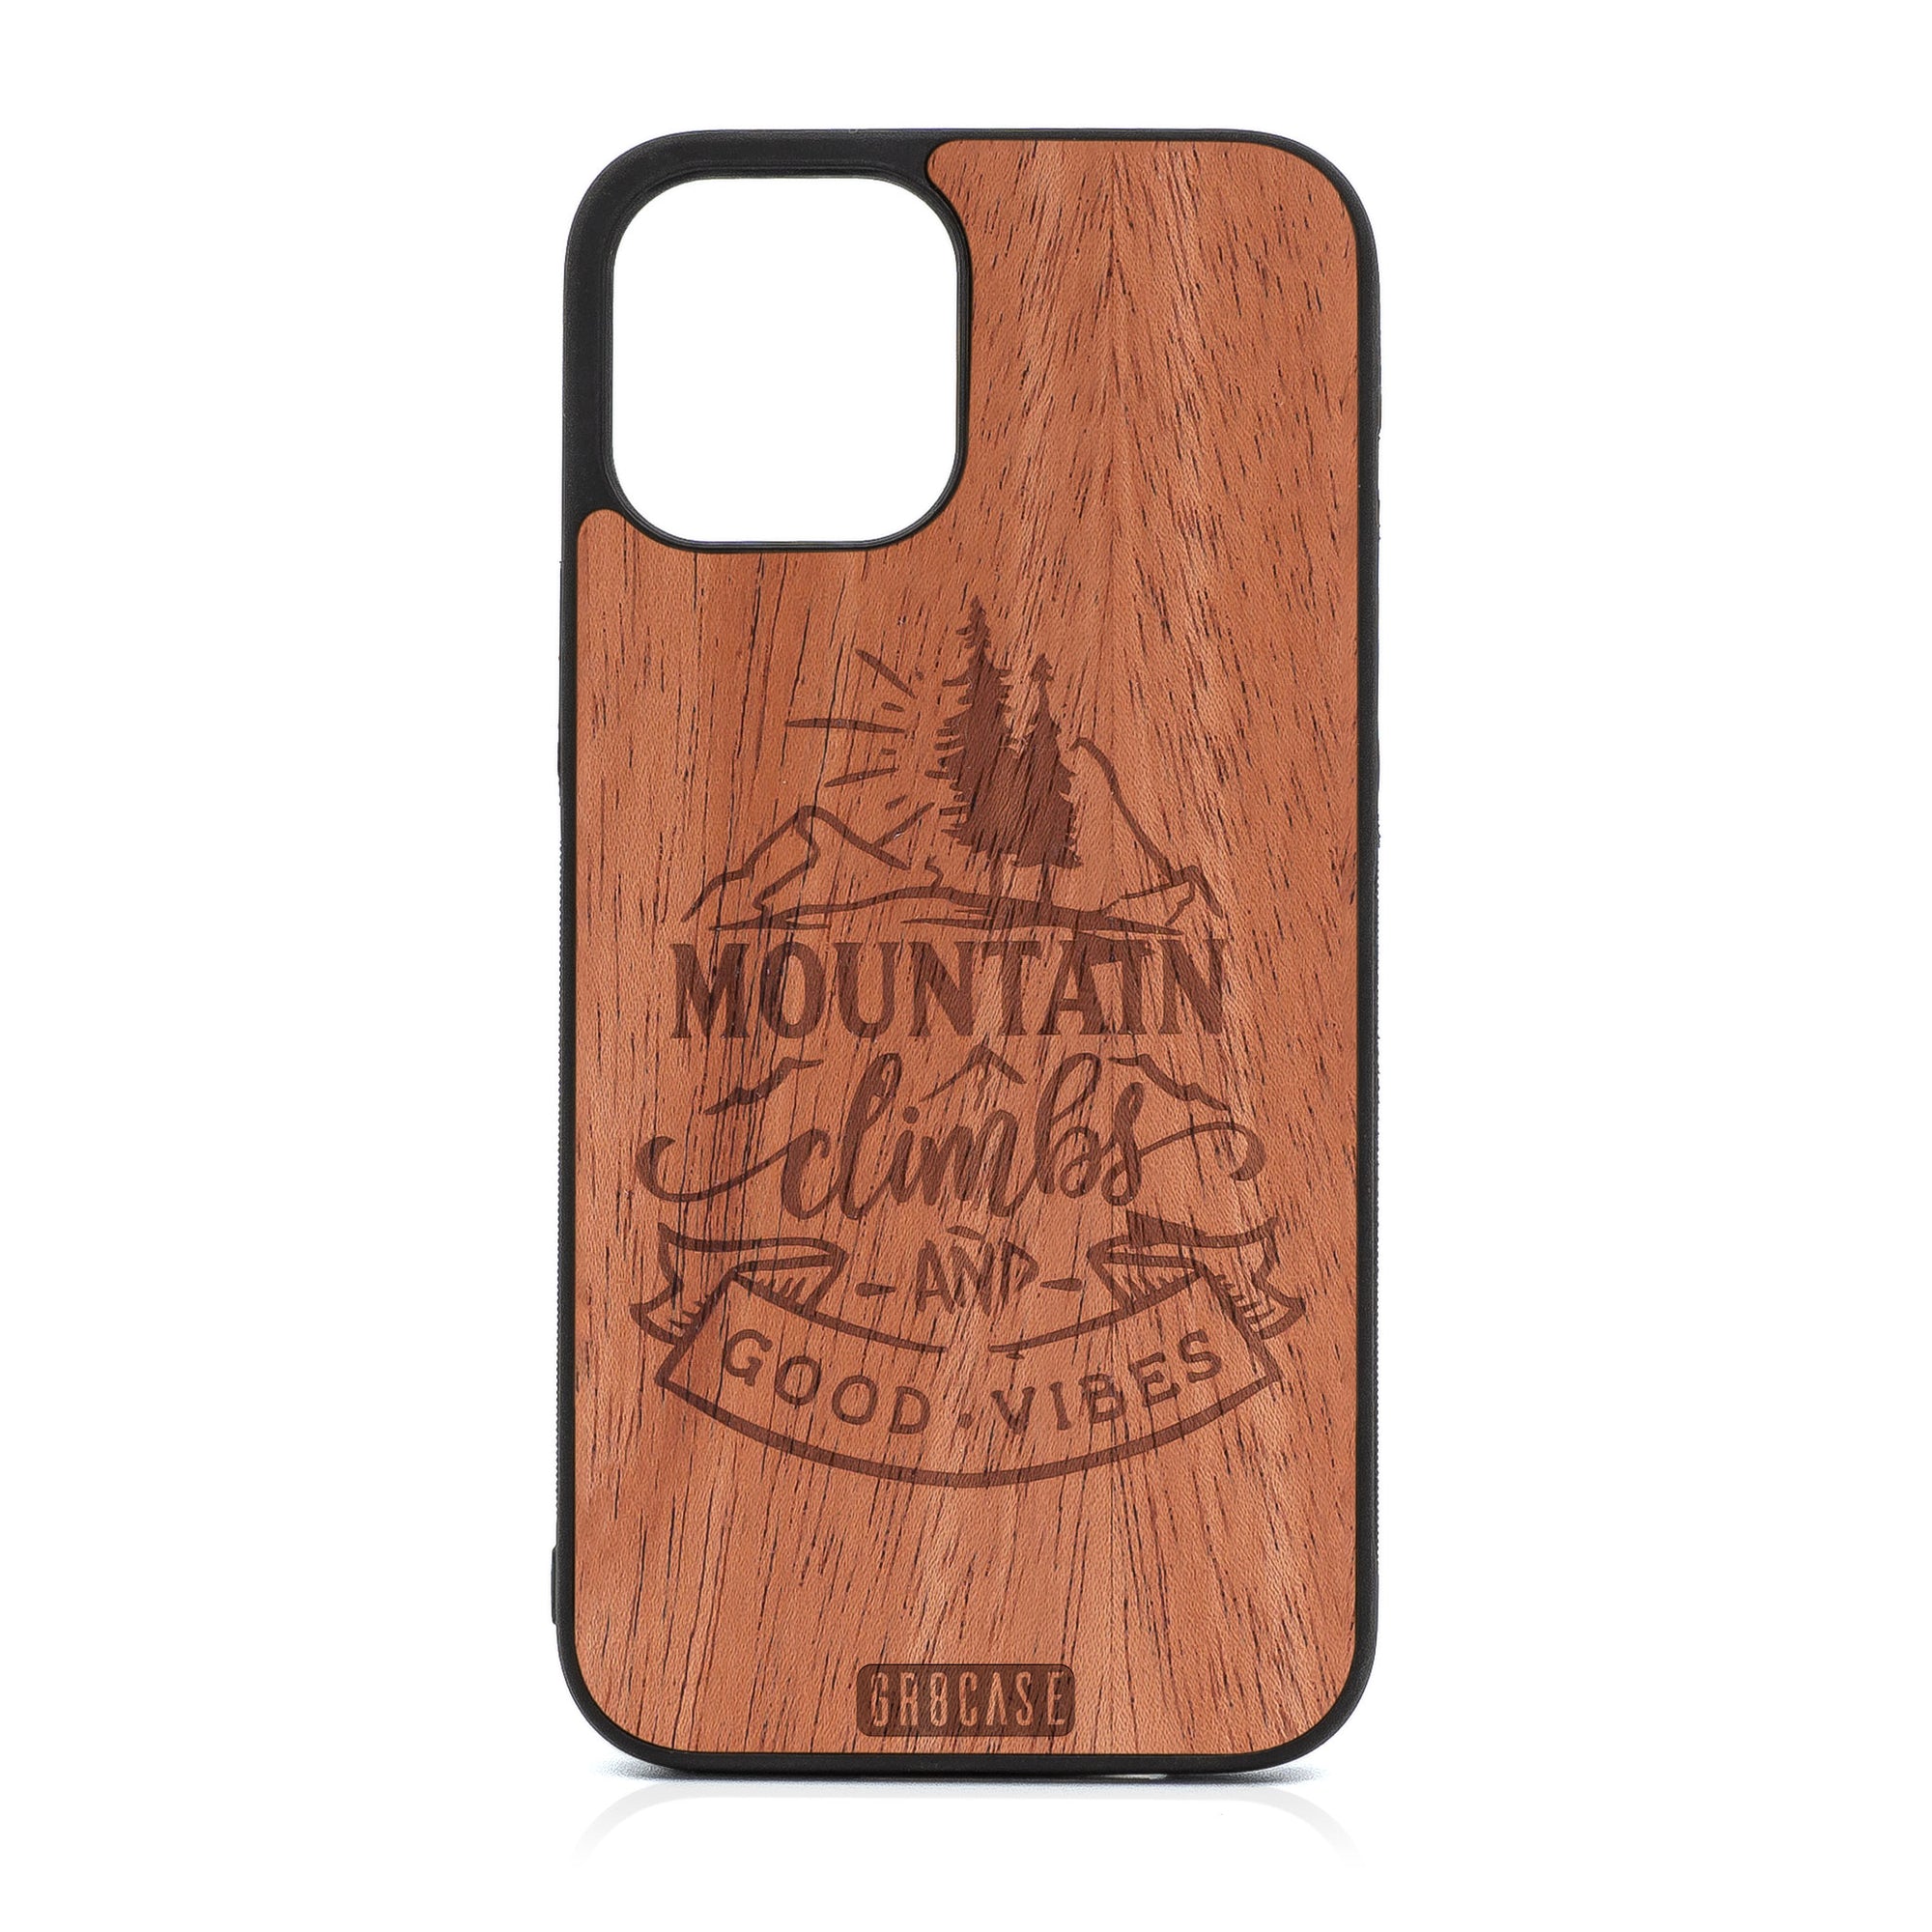 Mountain Climbs And Good Vibes Design Wood Case For iPhone 12 Pro Max